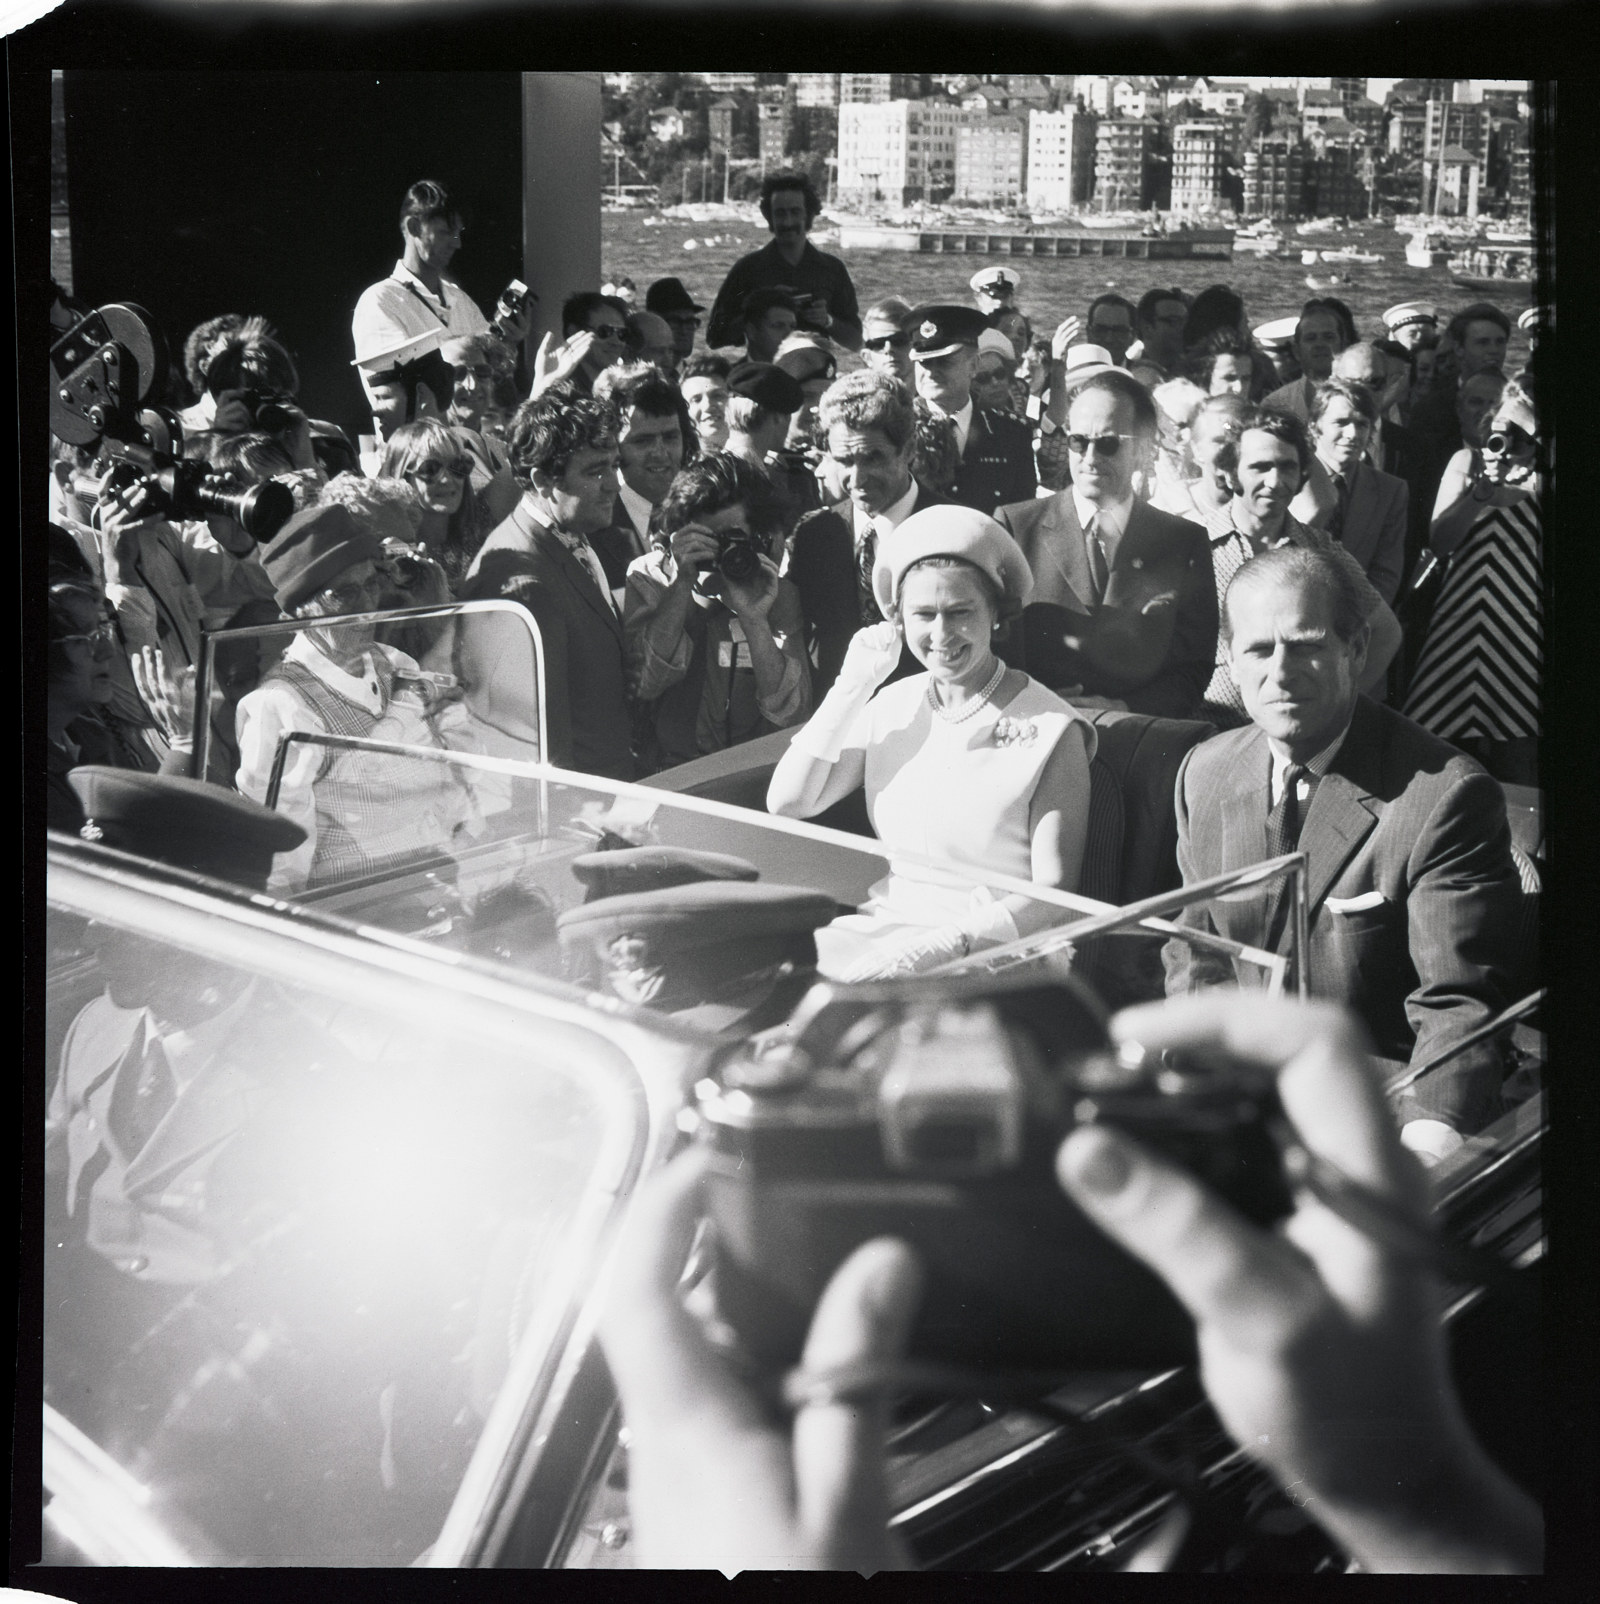 HM the Queen and Duke of Edinburgh leaving the forecourt in an open-top car following the opening ceremony and their tour of the Opera House, 20th October 1973.